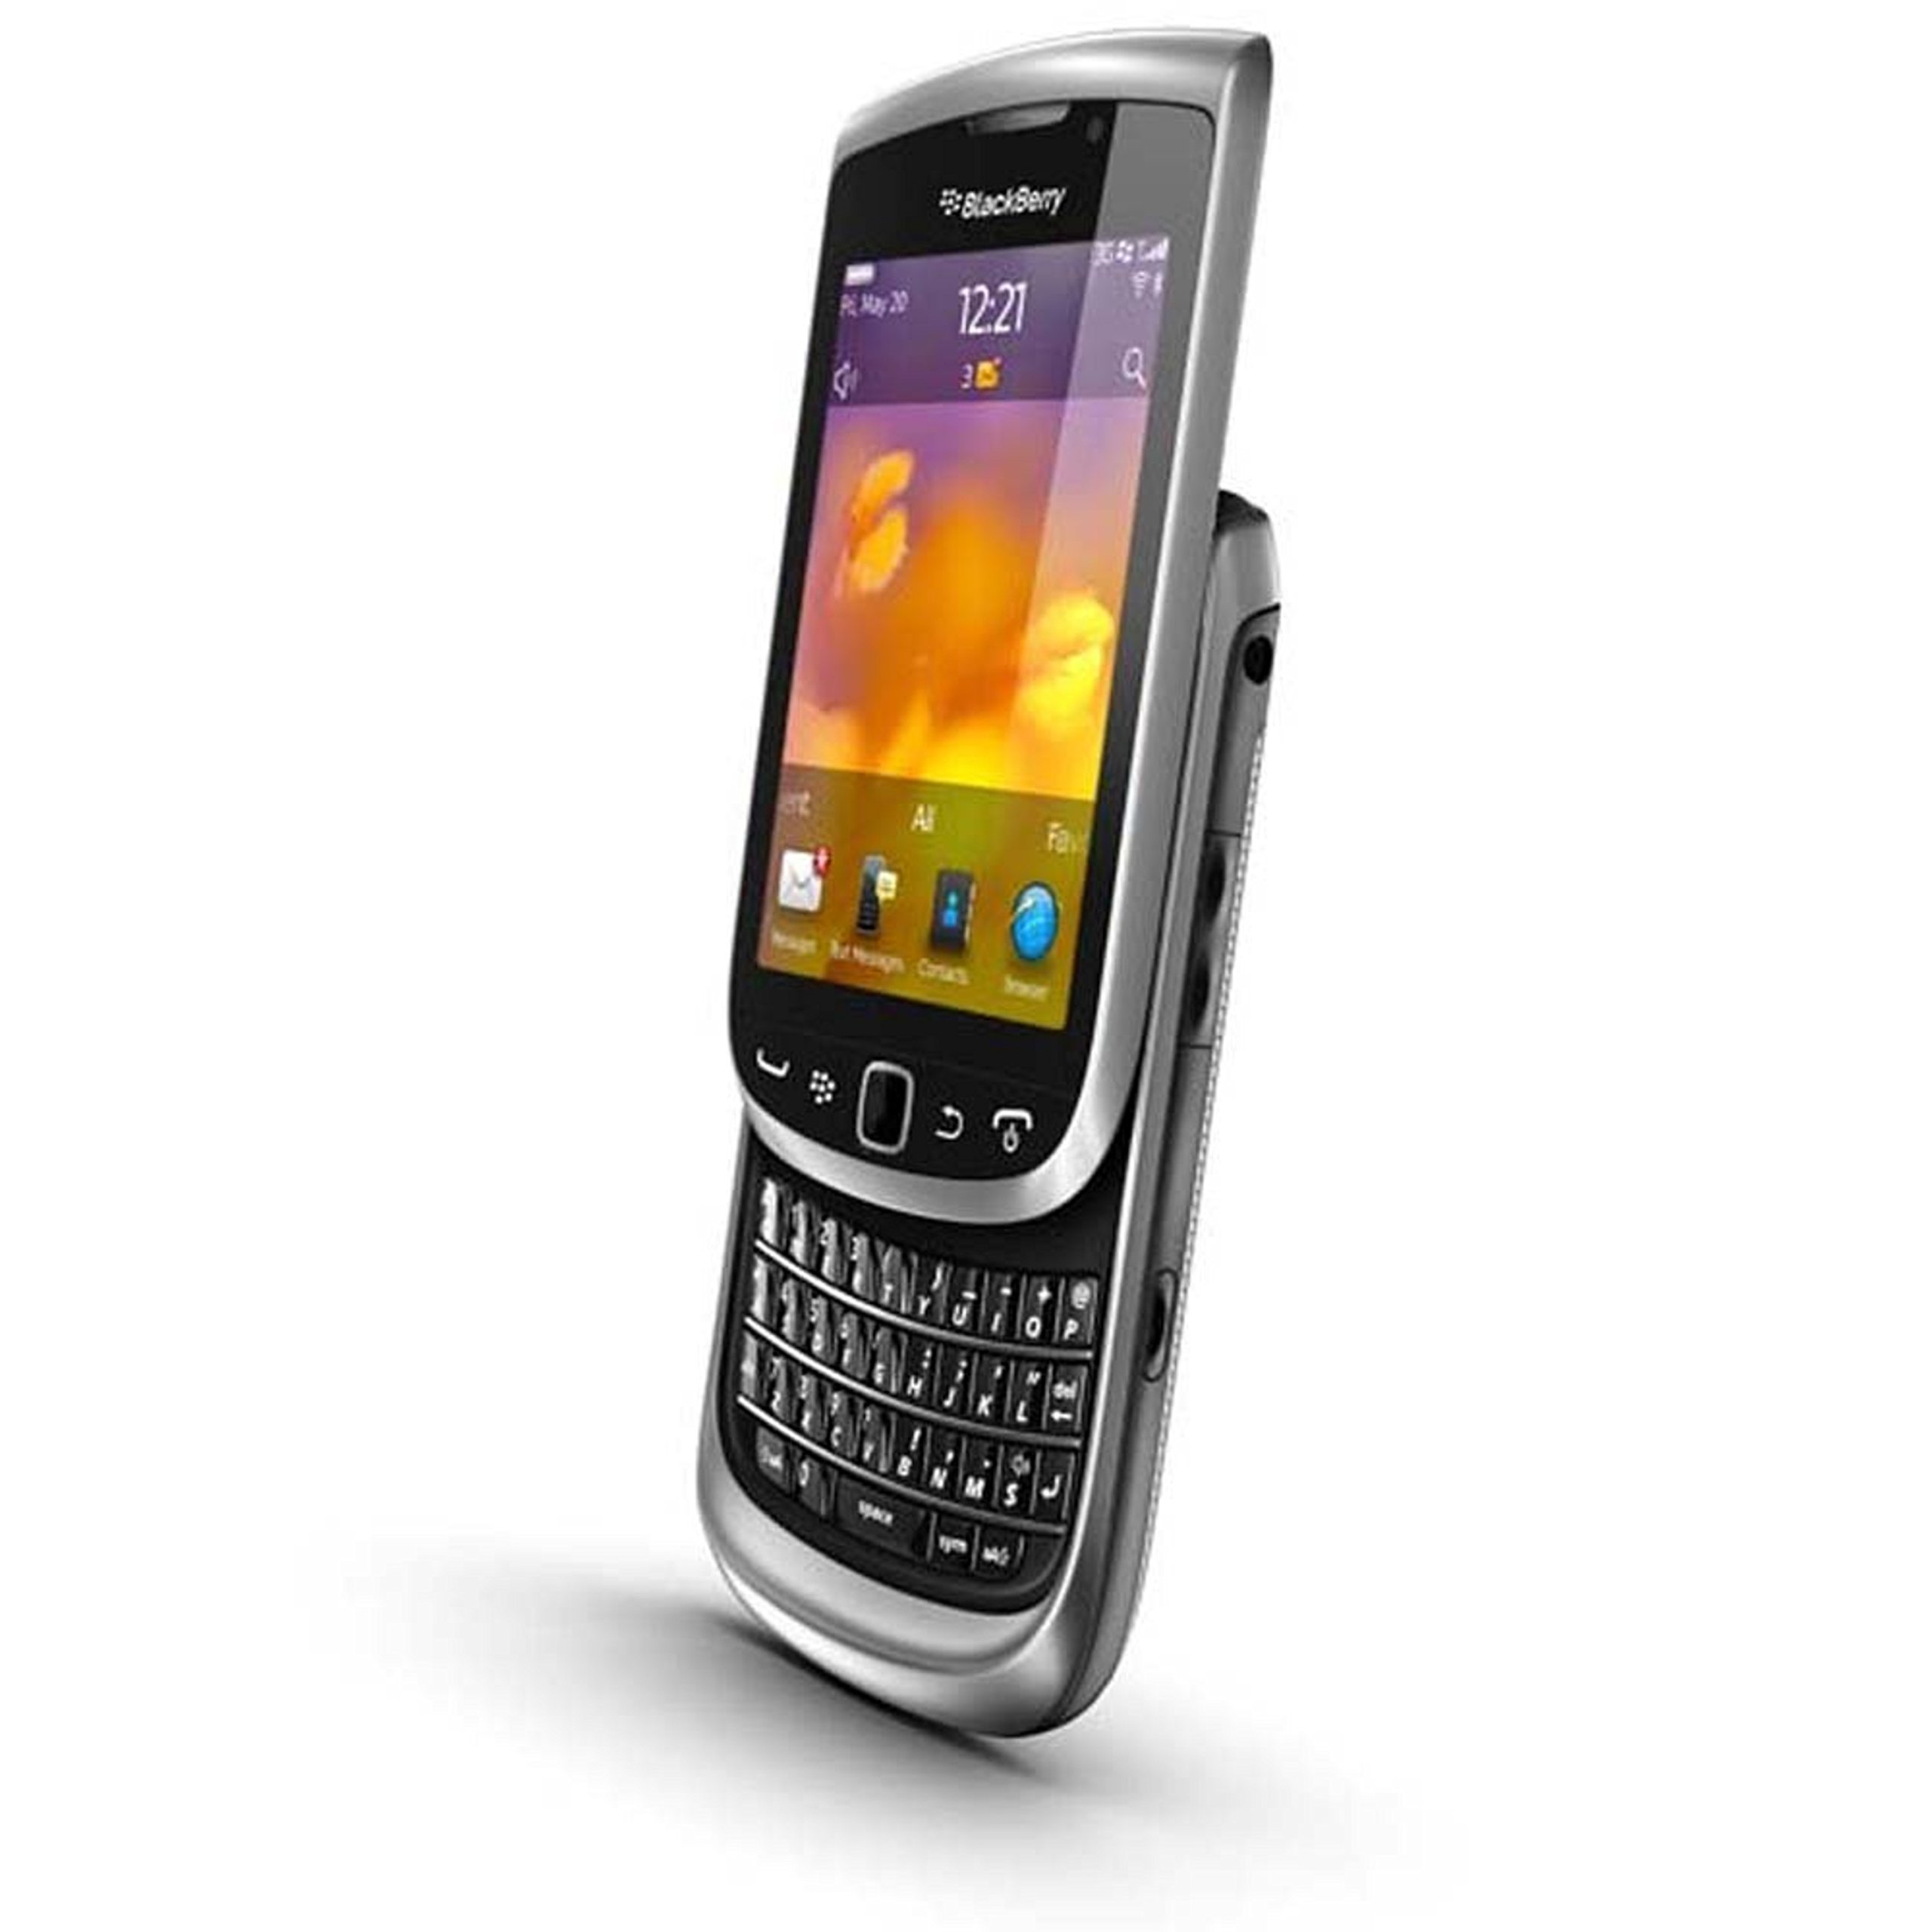 Blackberry Torch 9810 Unlocked GSM Phone with OS 7.0, Touchscreen, Slider-QWERTY Keboard, Optical Trackpad, 5MP Camera, Video, GPS, Wi-Fi, Bluetooth and microSD Slot - Silver